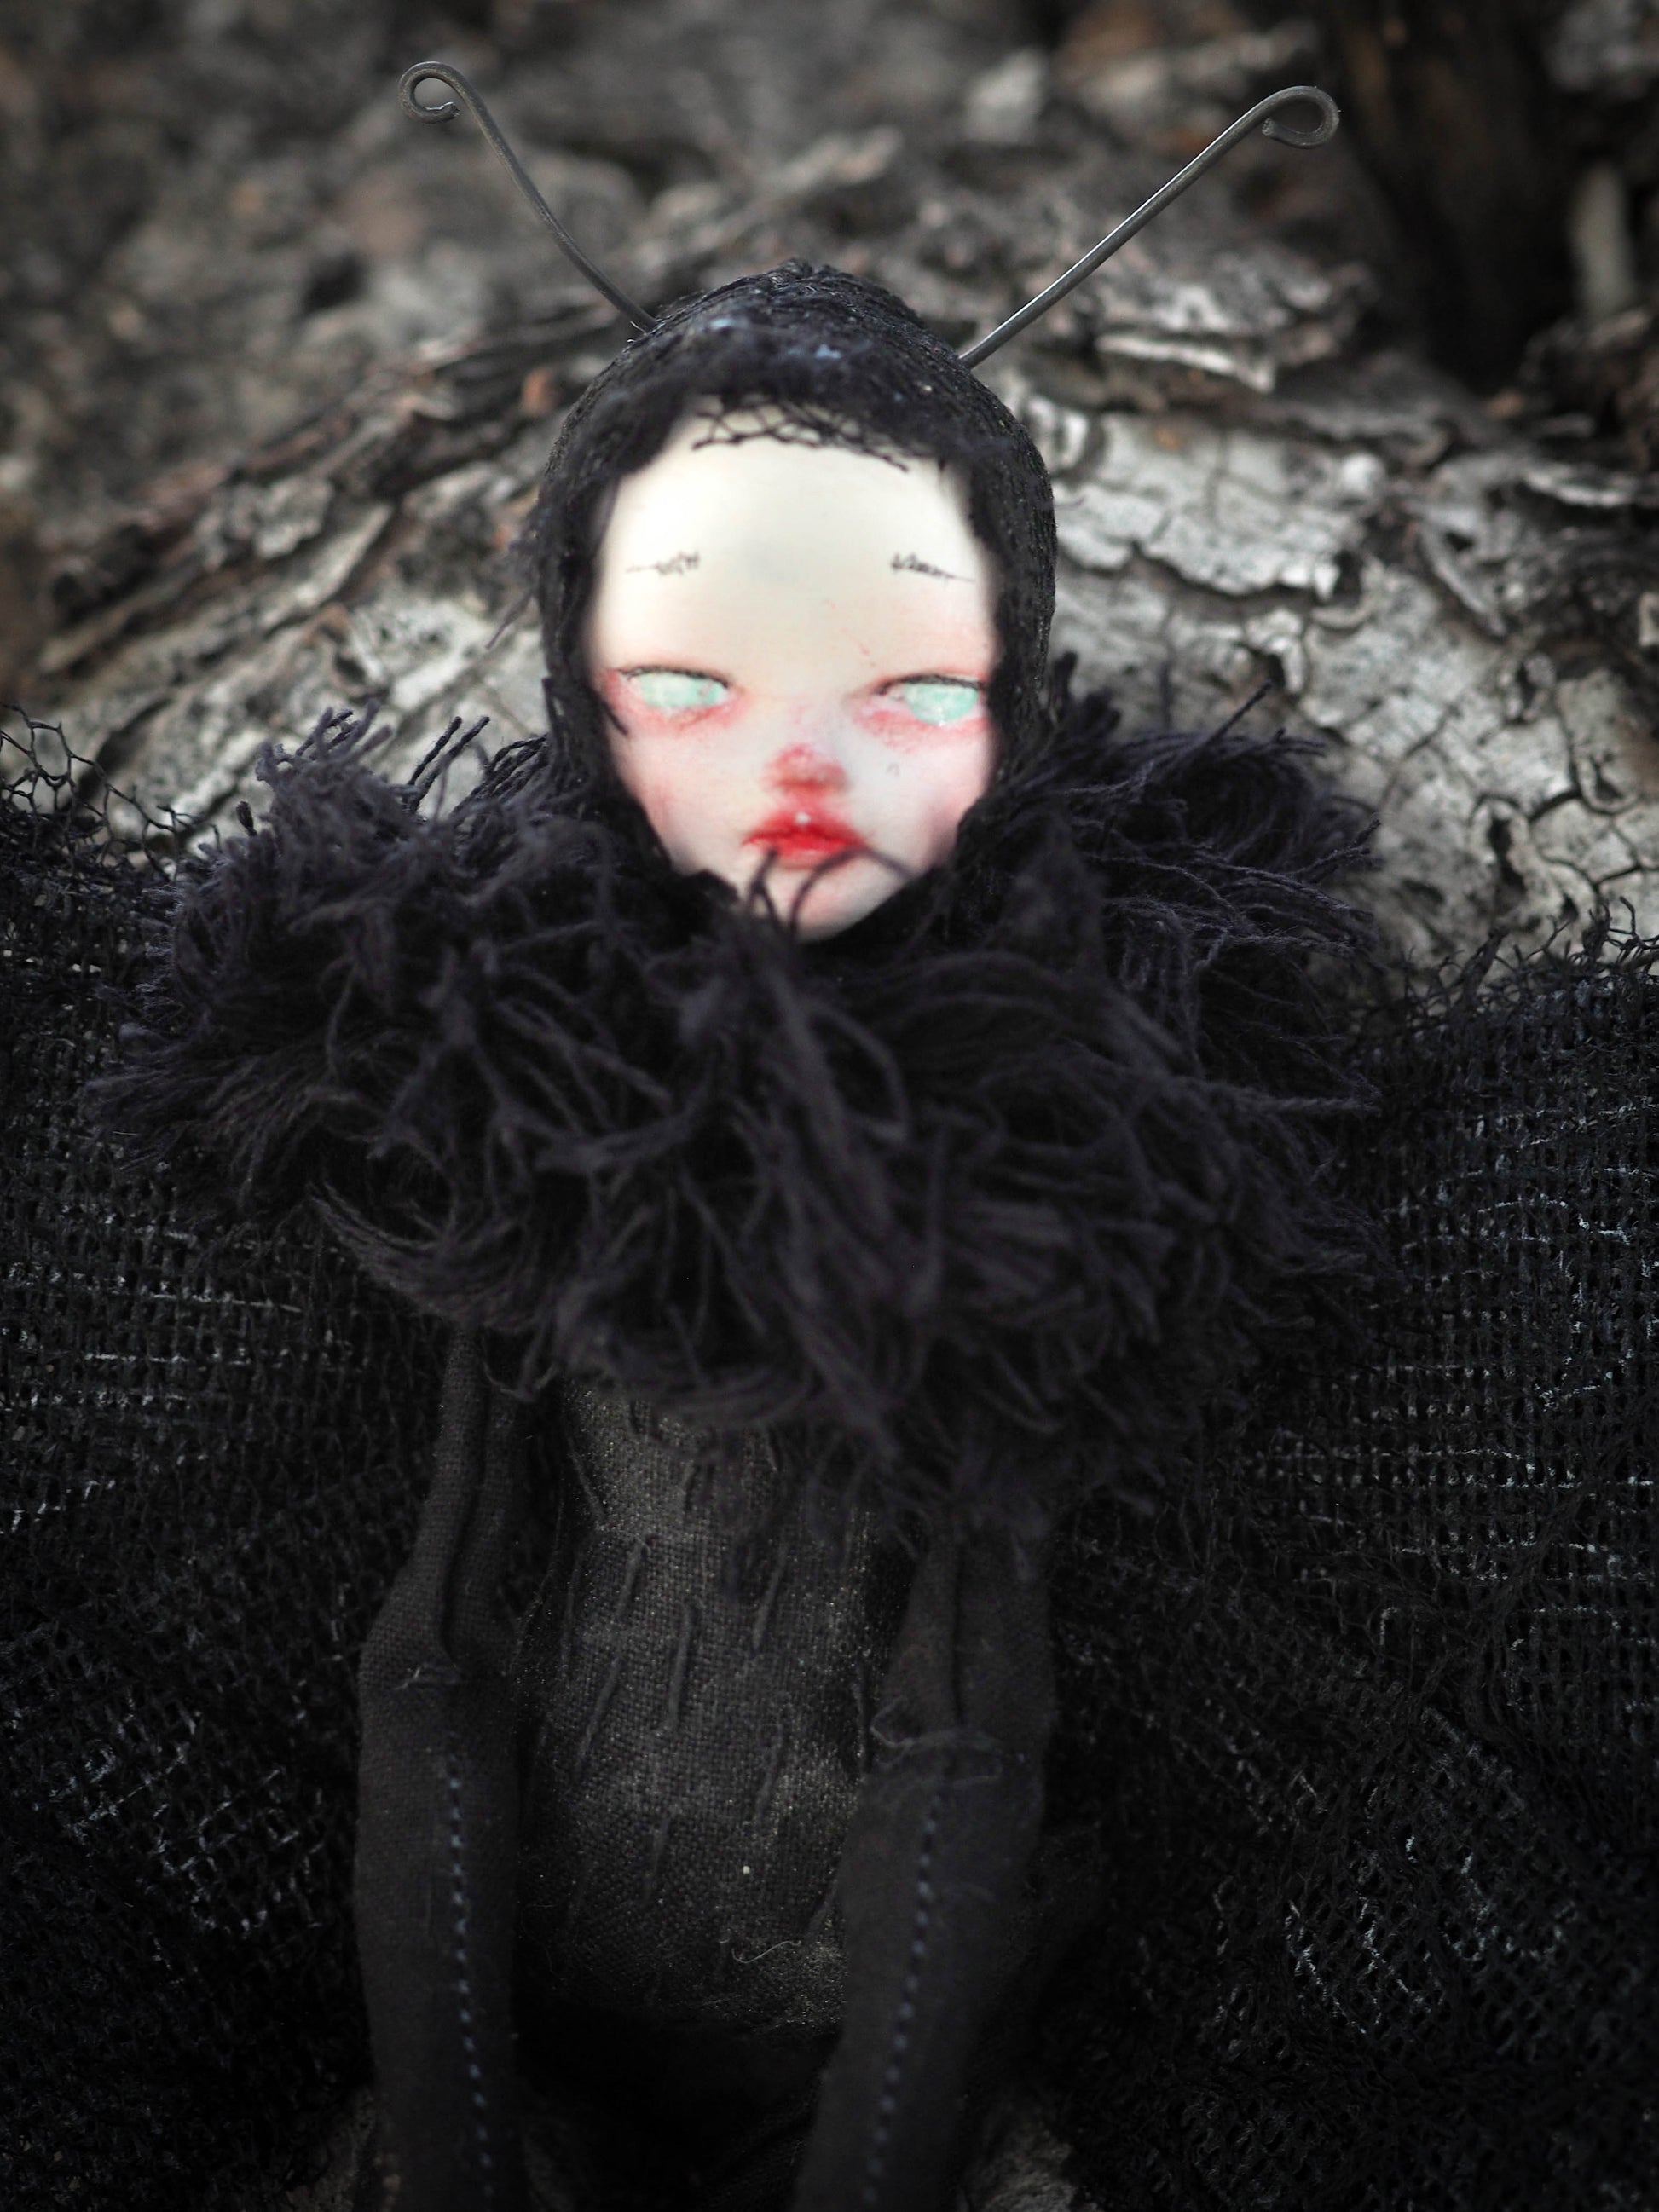 Original goth ard doll y Danita Art. Moth figurine toy perfect for the halloween collector who loves handmade unique surreal and whimsical art